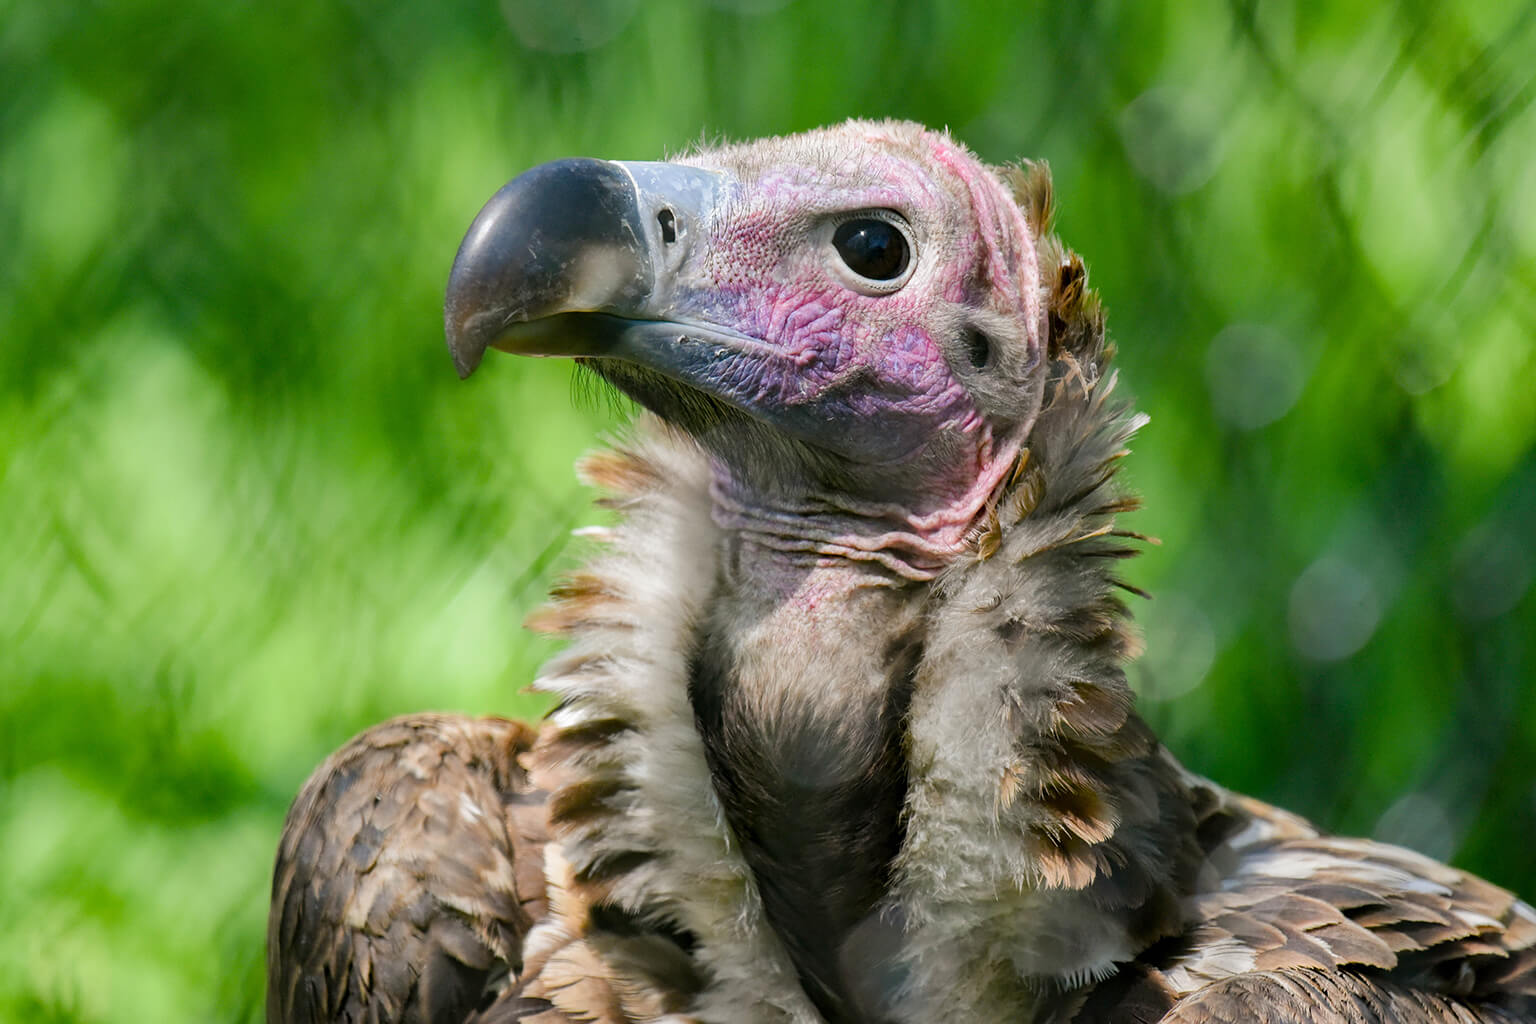 Lappet-faced Vulture | The Maryland Zoo